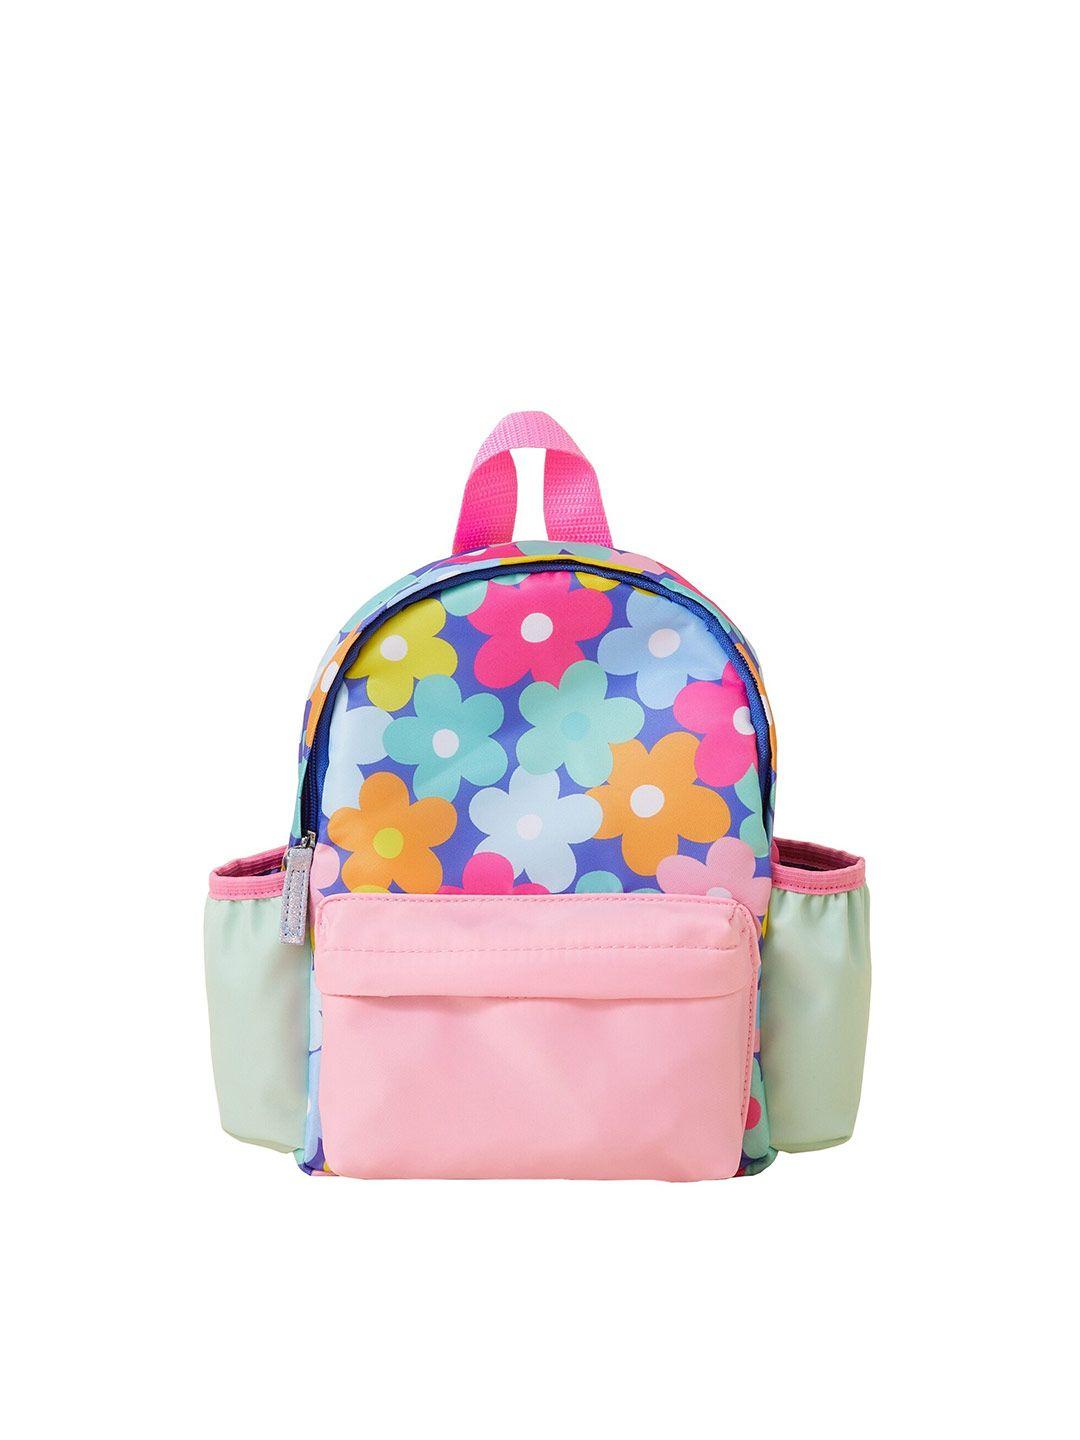 accessorize girls floral printed backpack